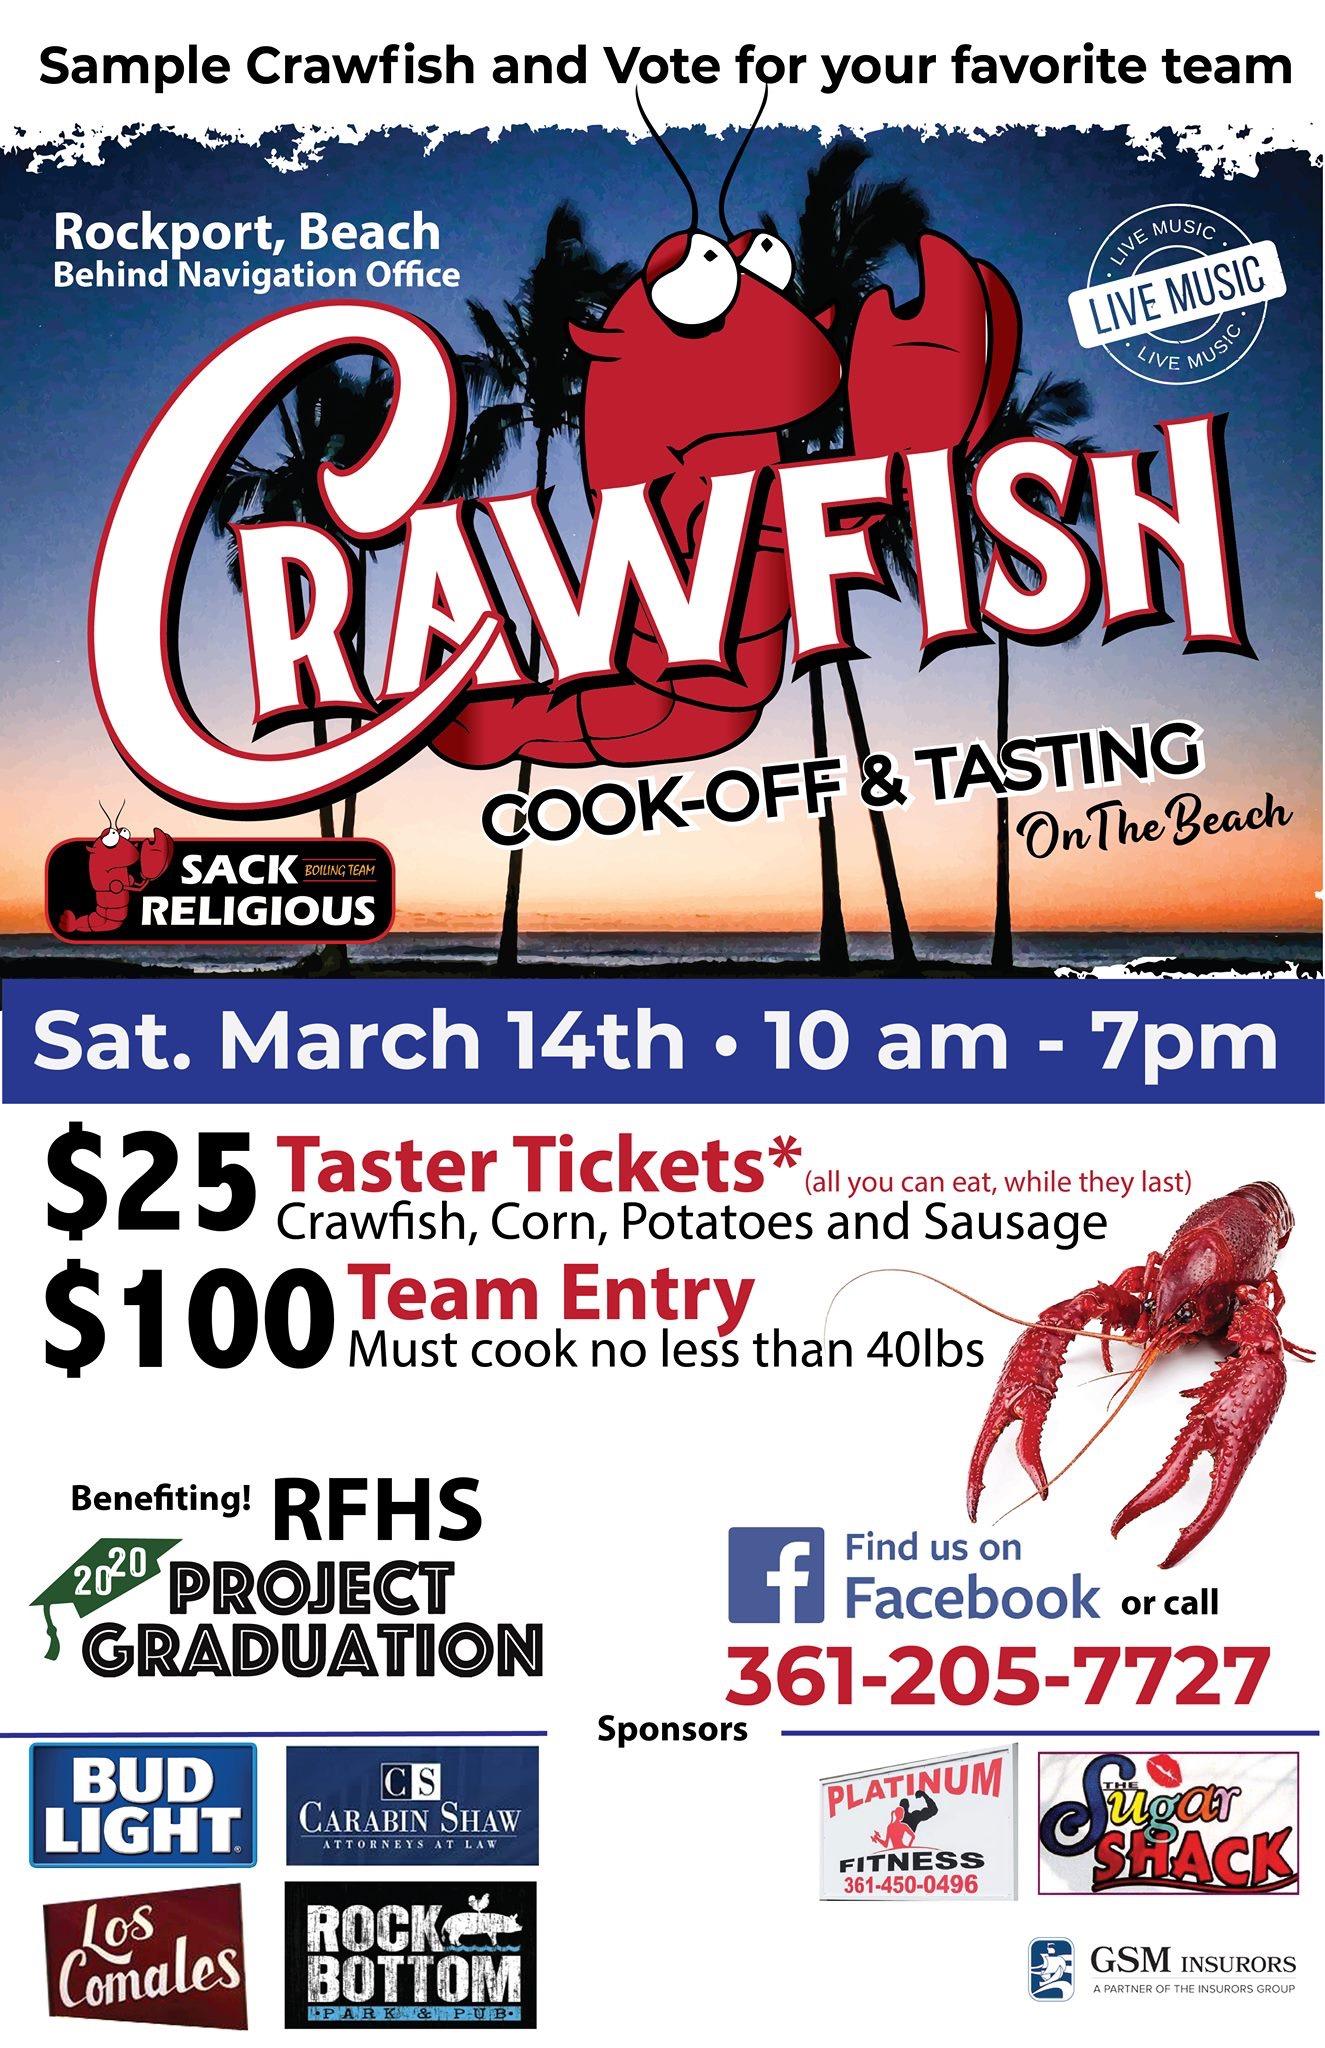 Rockport Crawfish CookOff and Taste. Hosted by Sack Religious 14 MAR